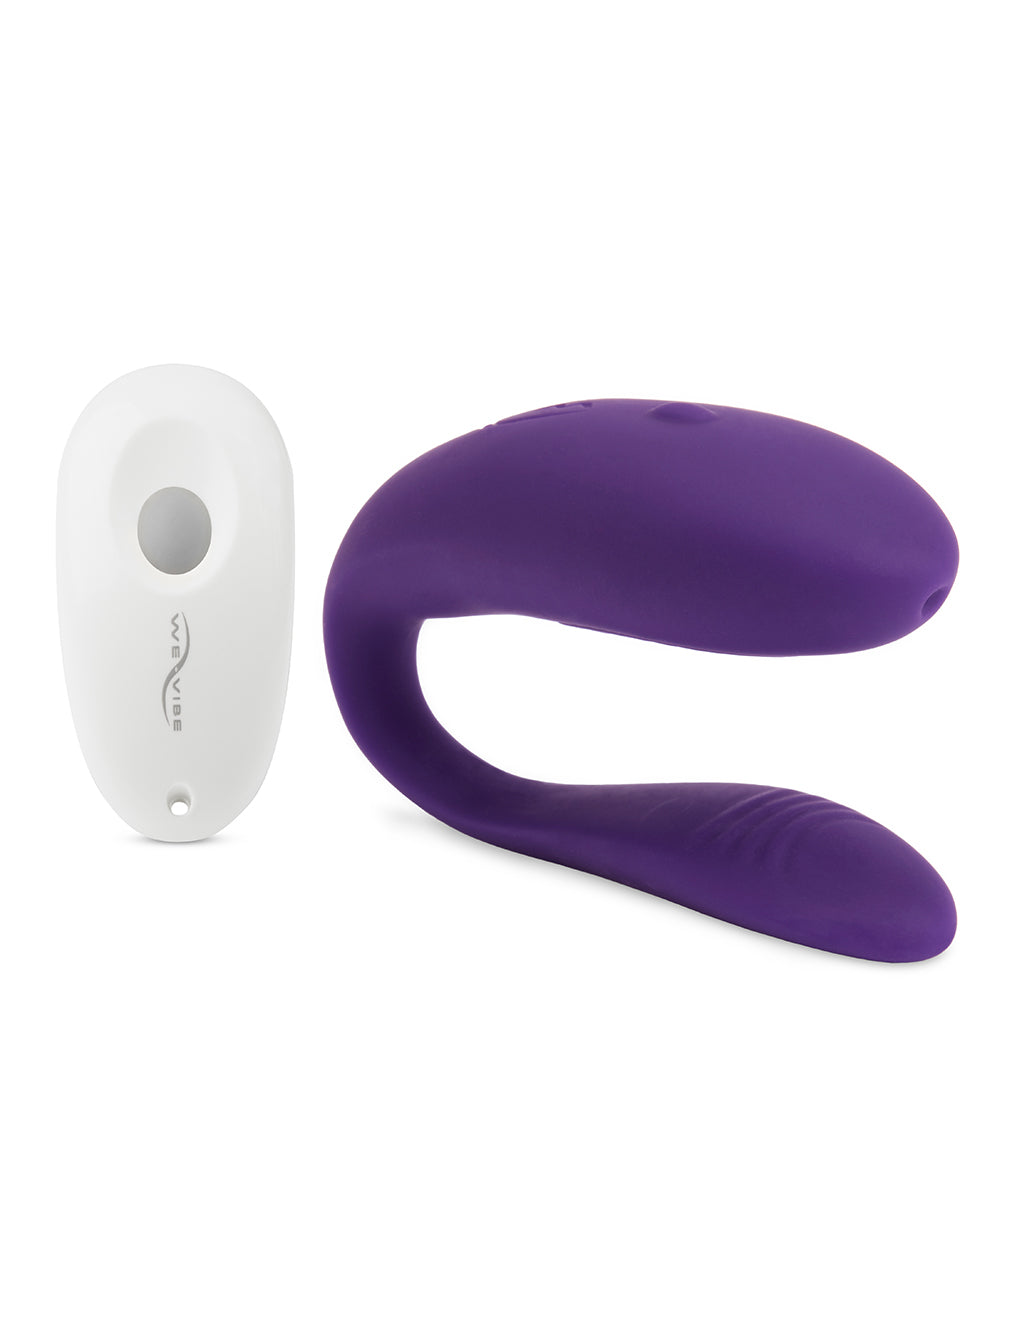 We-Vibe Unite Version 2- Front with Remote